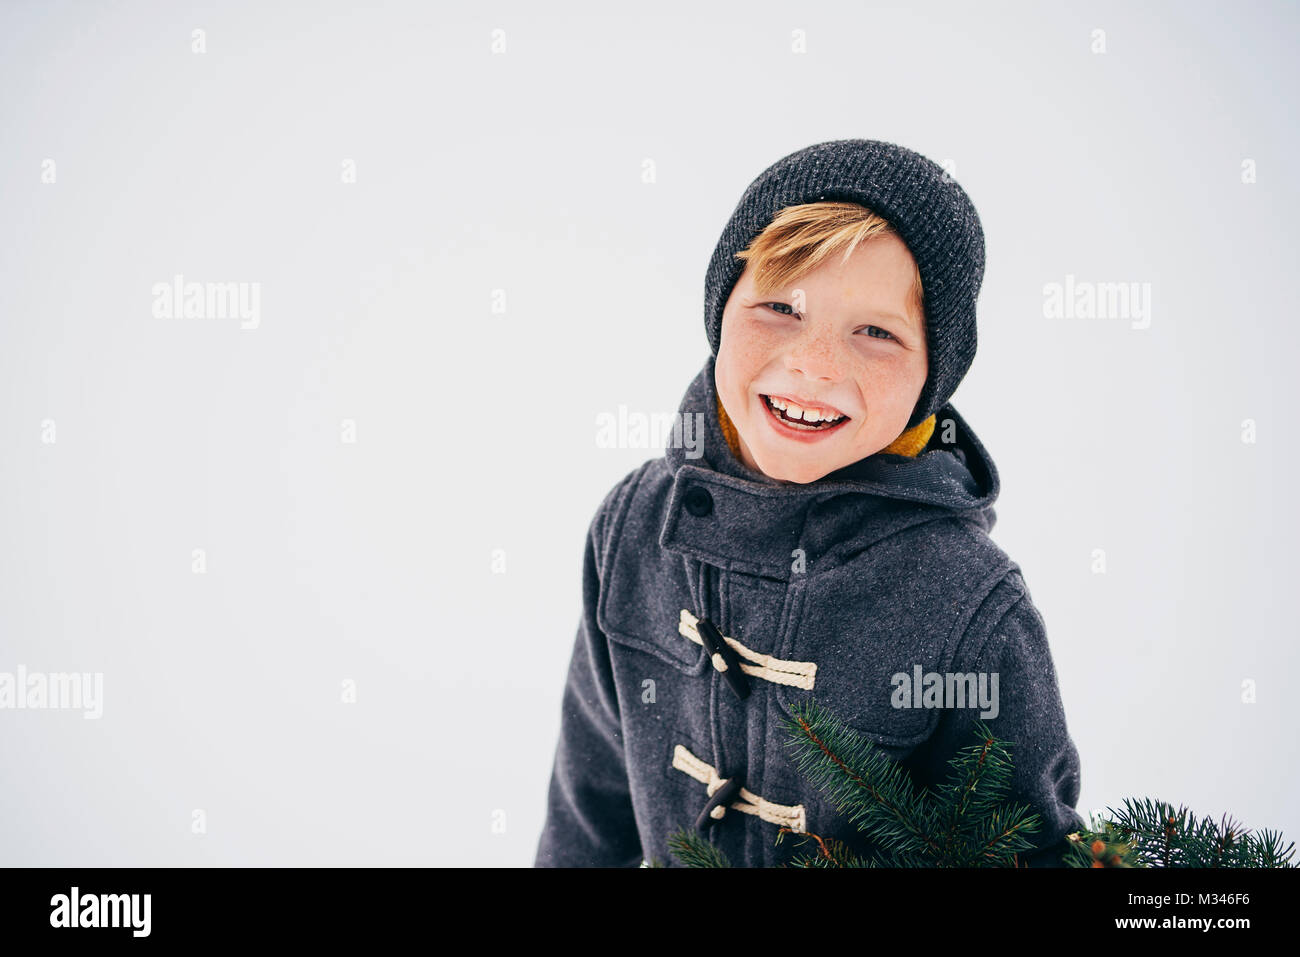 Portrait of a smiling boy standing in snow Stock Photo